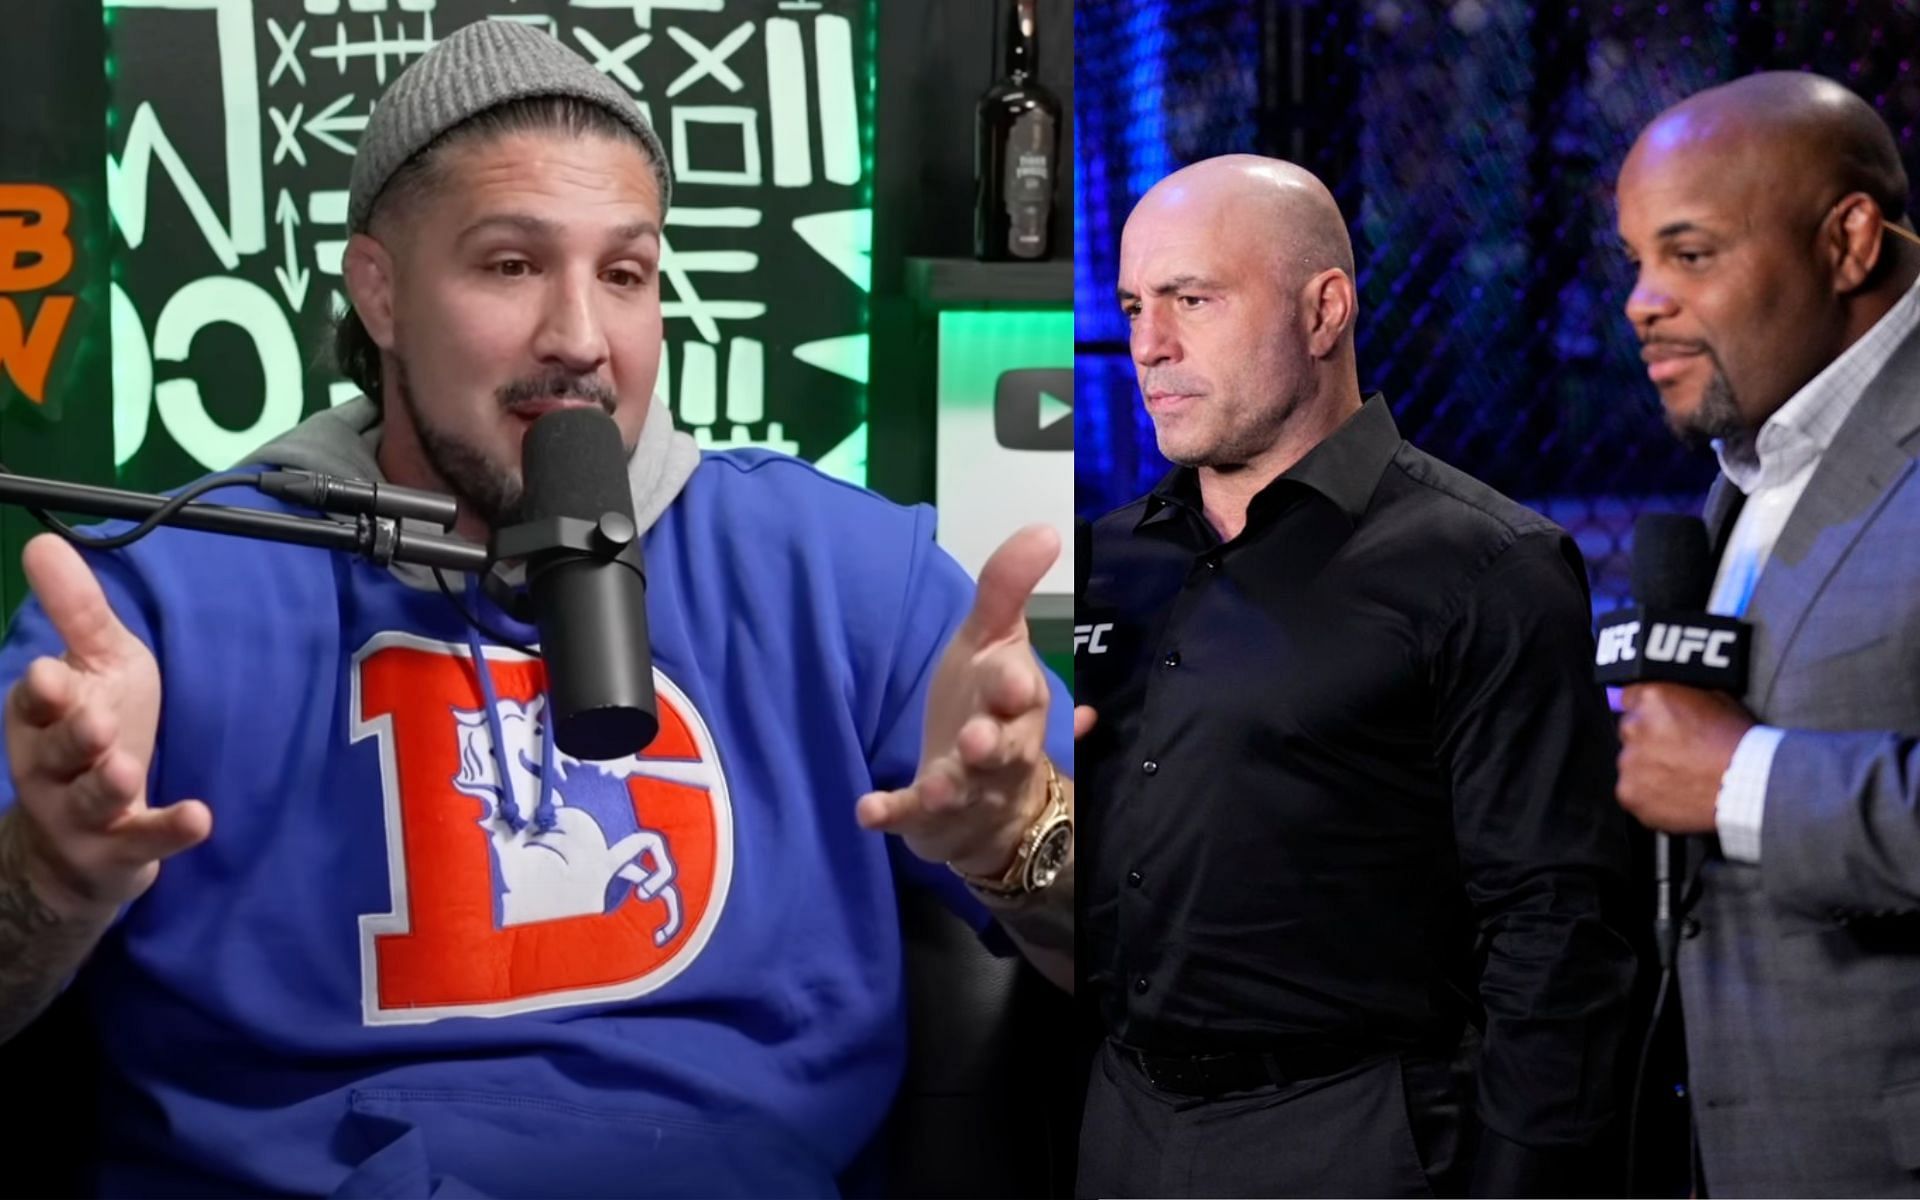 Brendan Schaub (left) and Joe Rogan and Daniel Cormier (right). [left image from YouTube Thiccc Boy and right image from Getty Images]